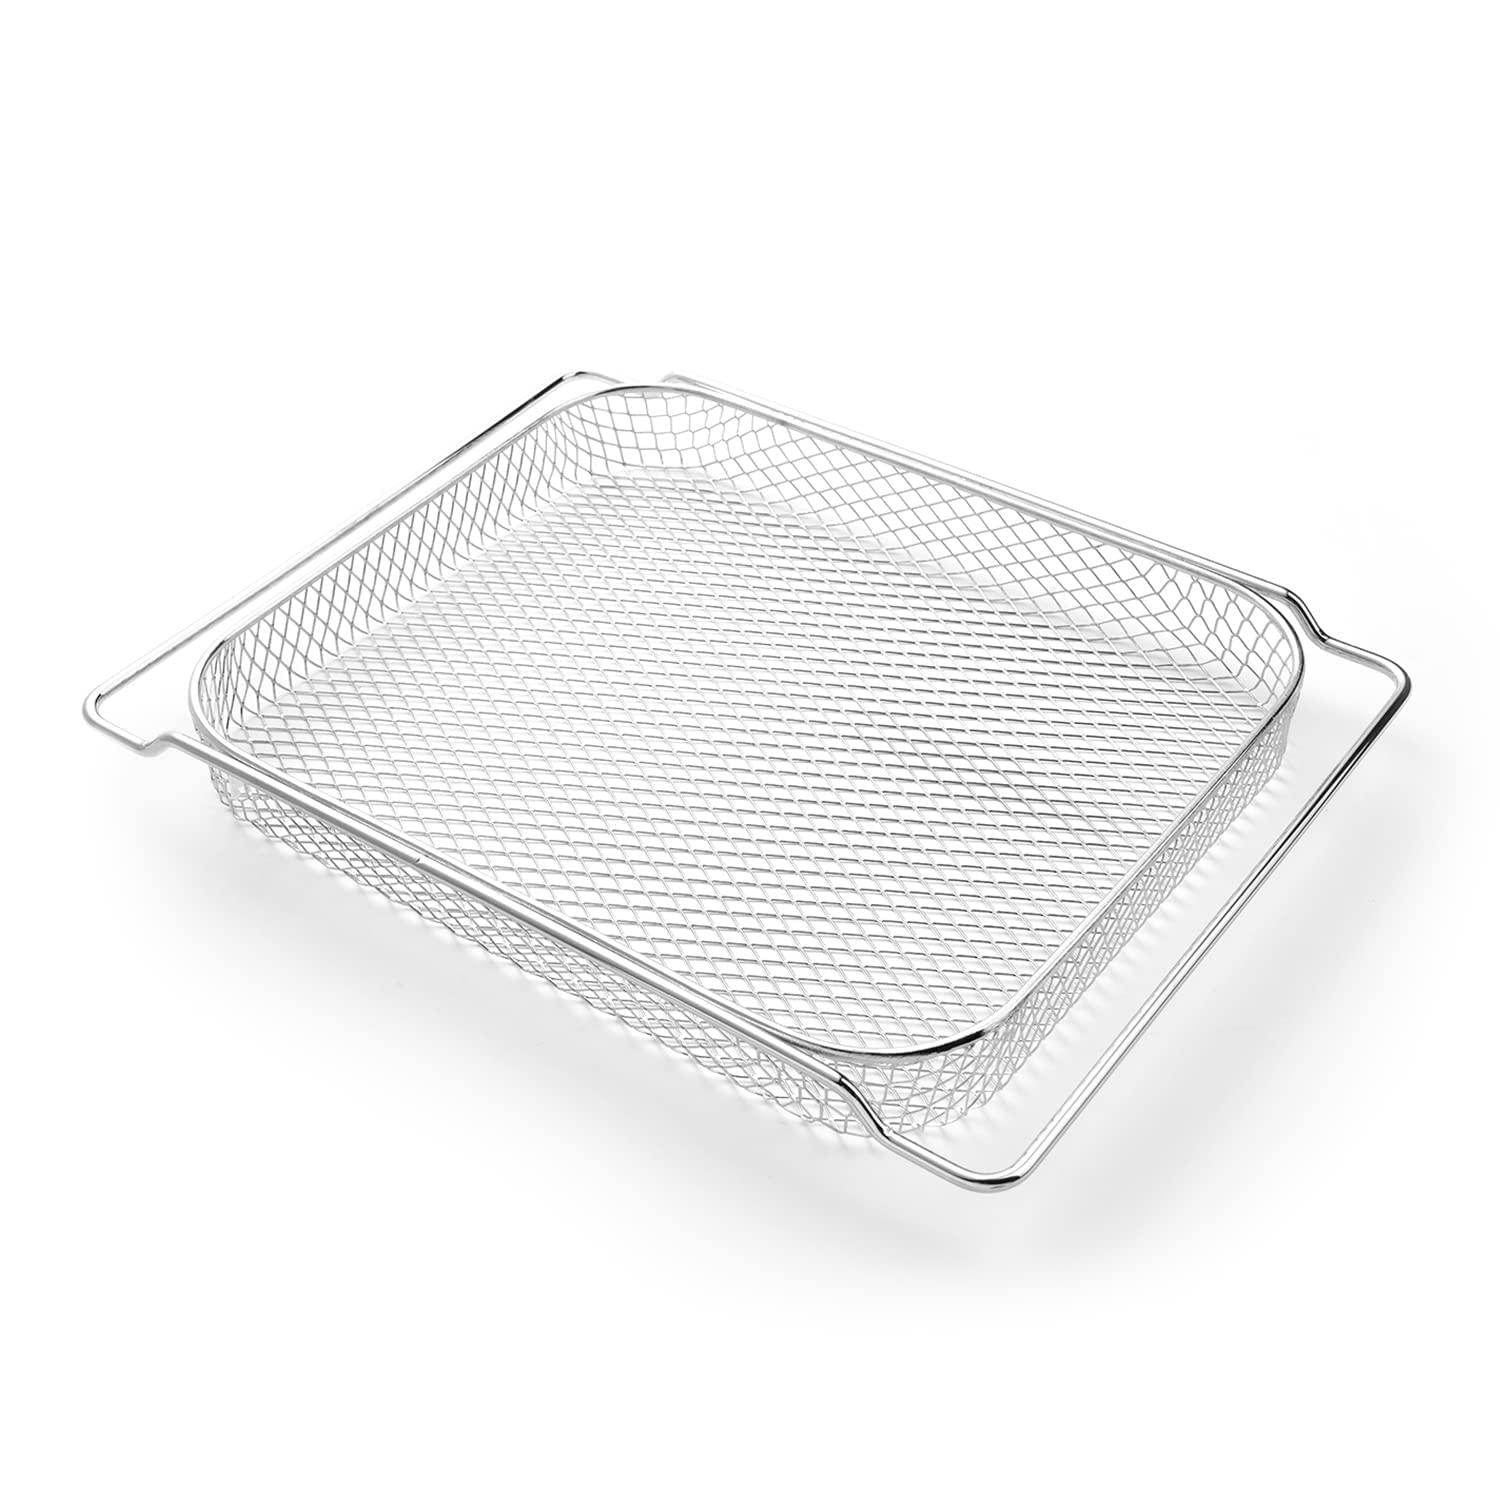 val cucina air fry basket, compatible with ta-25 air fryer toaster oven (air fryer basket)